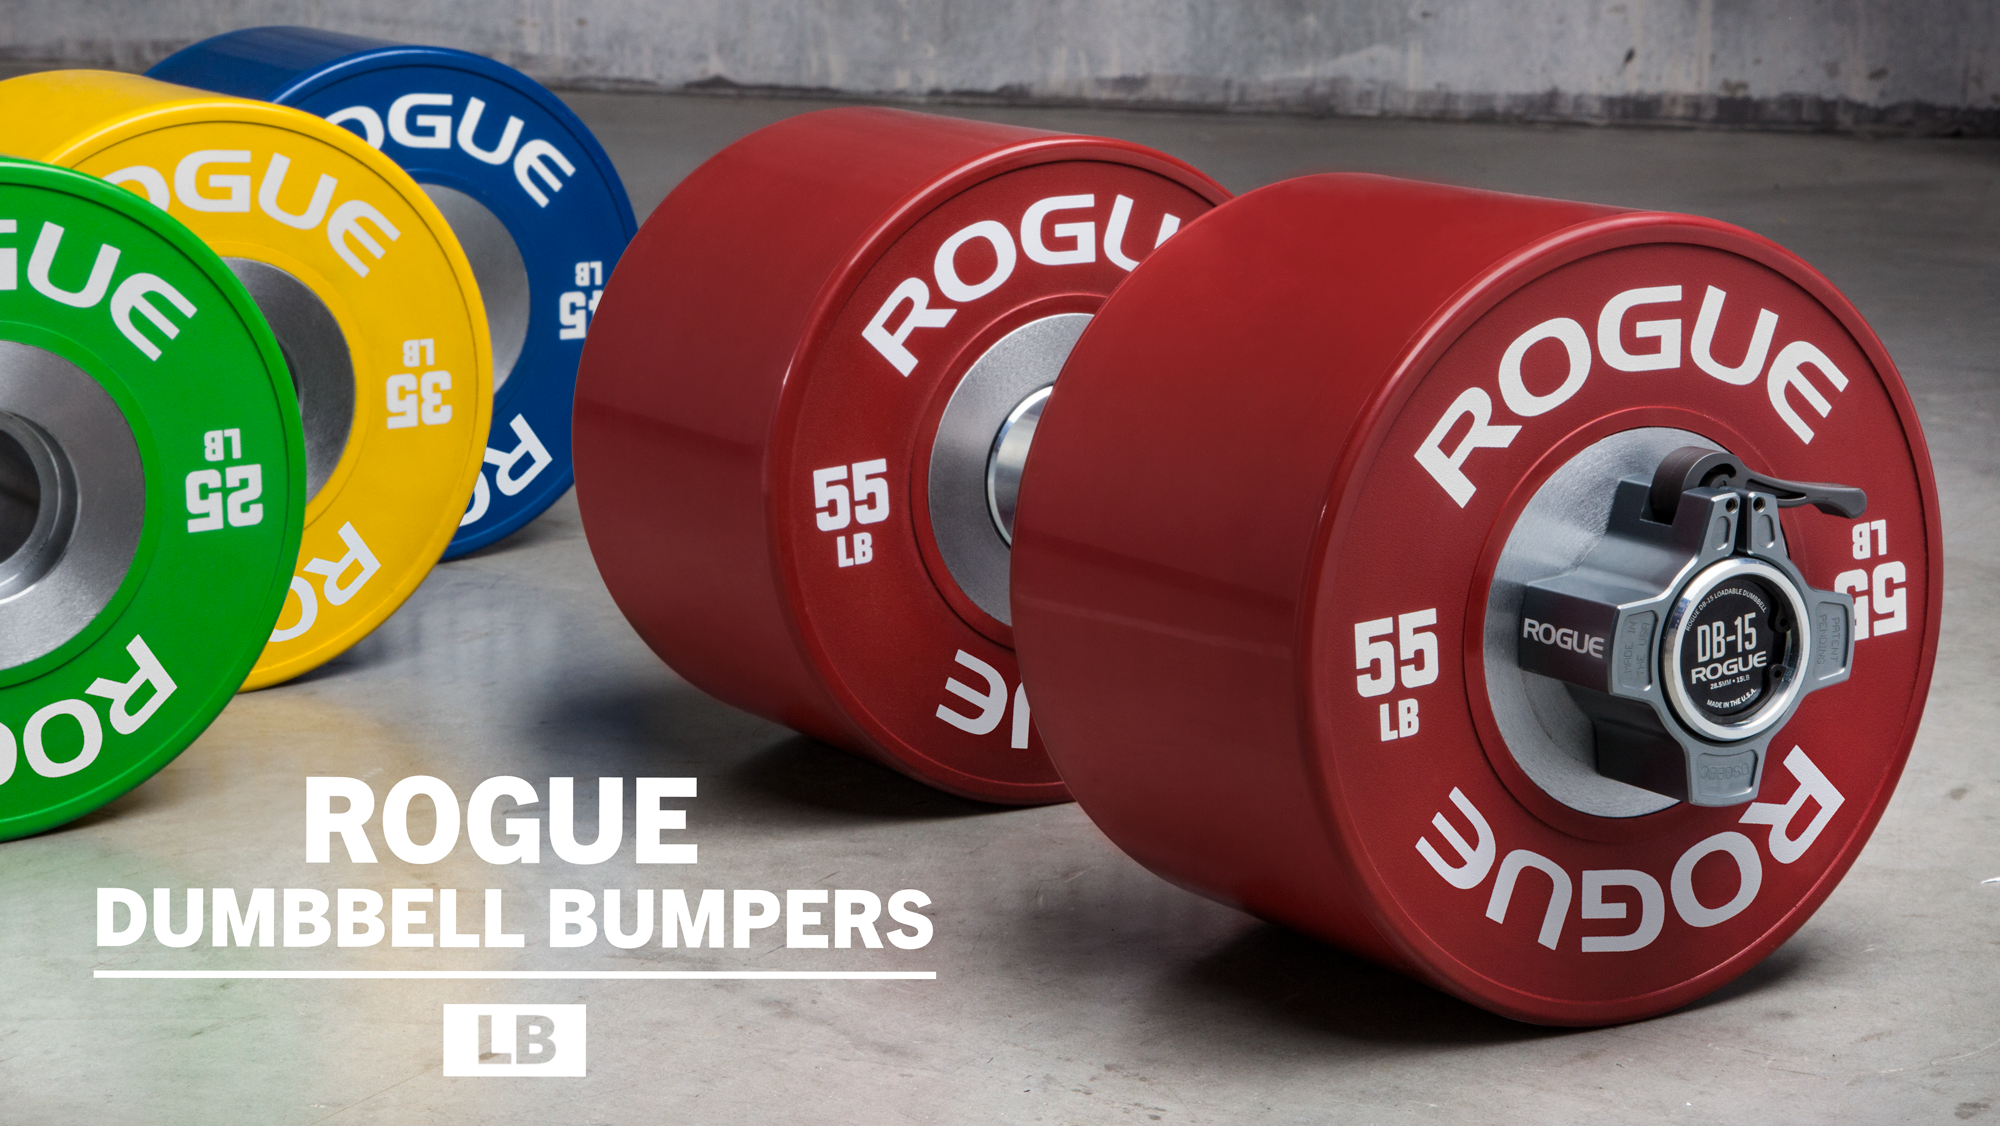 Rogue Dumbbell Bumpers